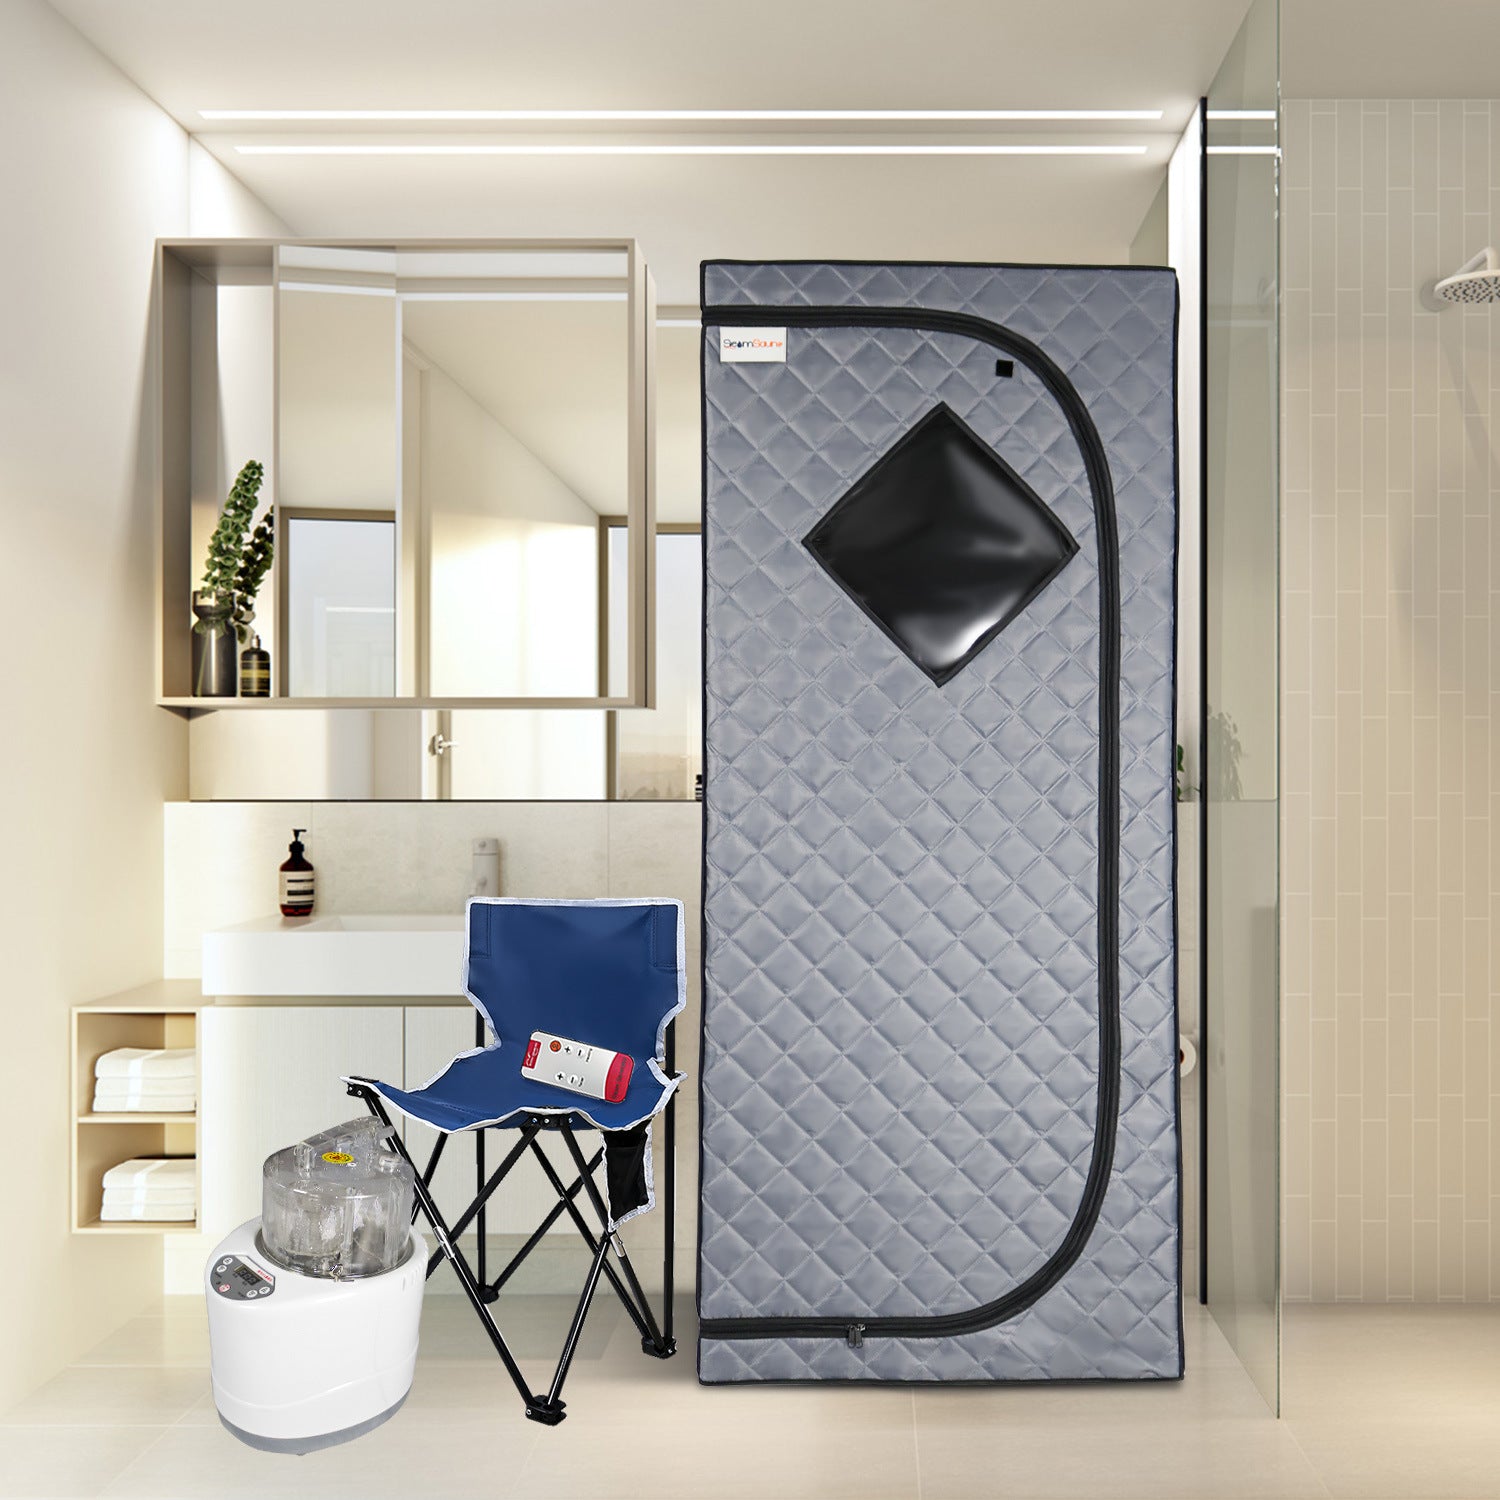 Personal Spa Experience: Sojourner Portable Home Sauna - Tent, Heater, Chair, Remote Included